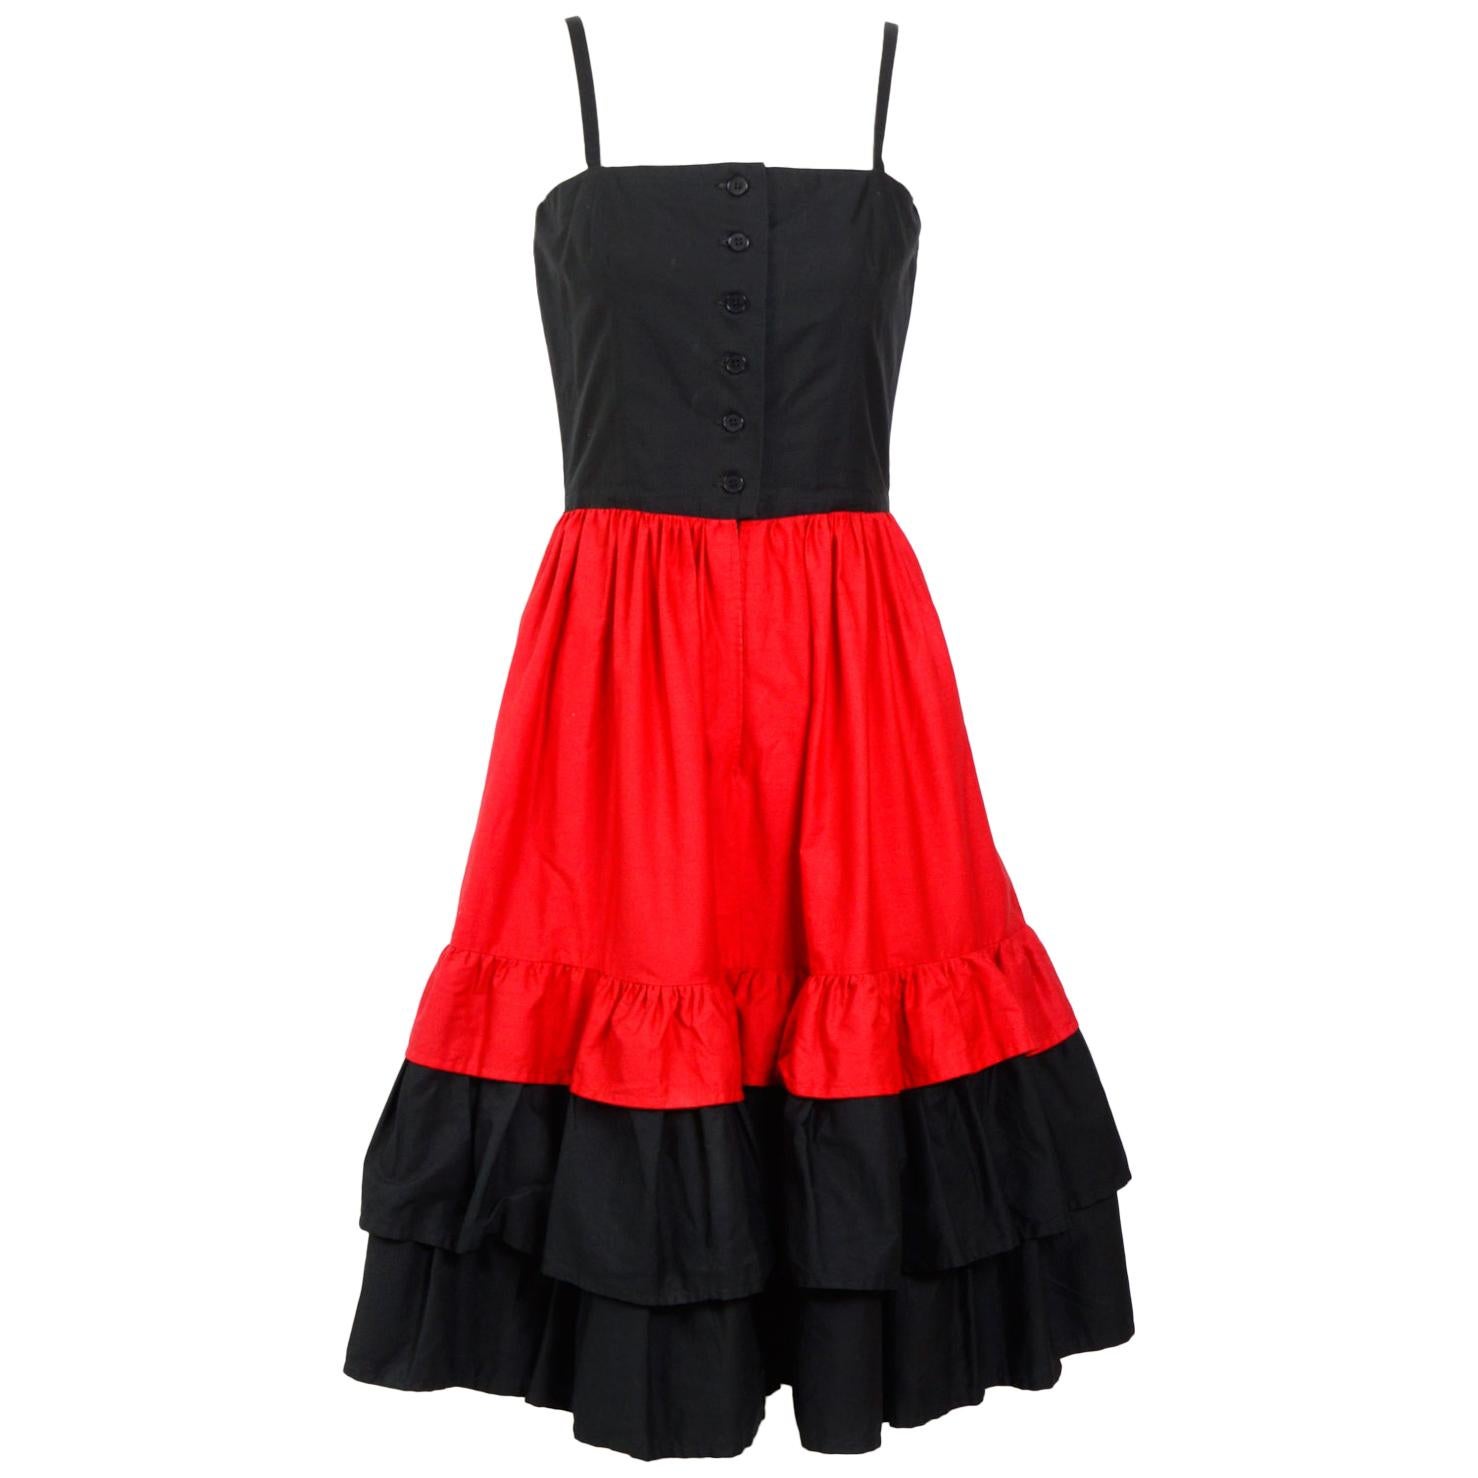 Lanvin vintage 1970s cotton red and black ruffle skirt dress For Sale